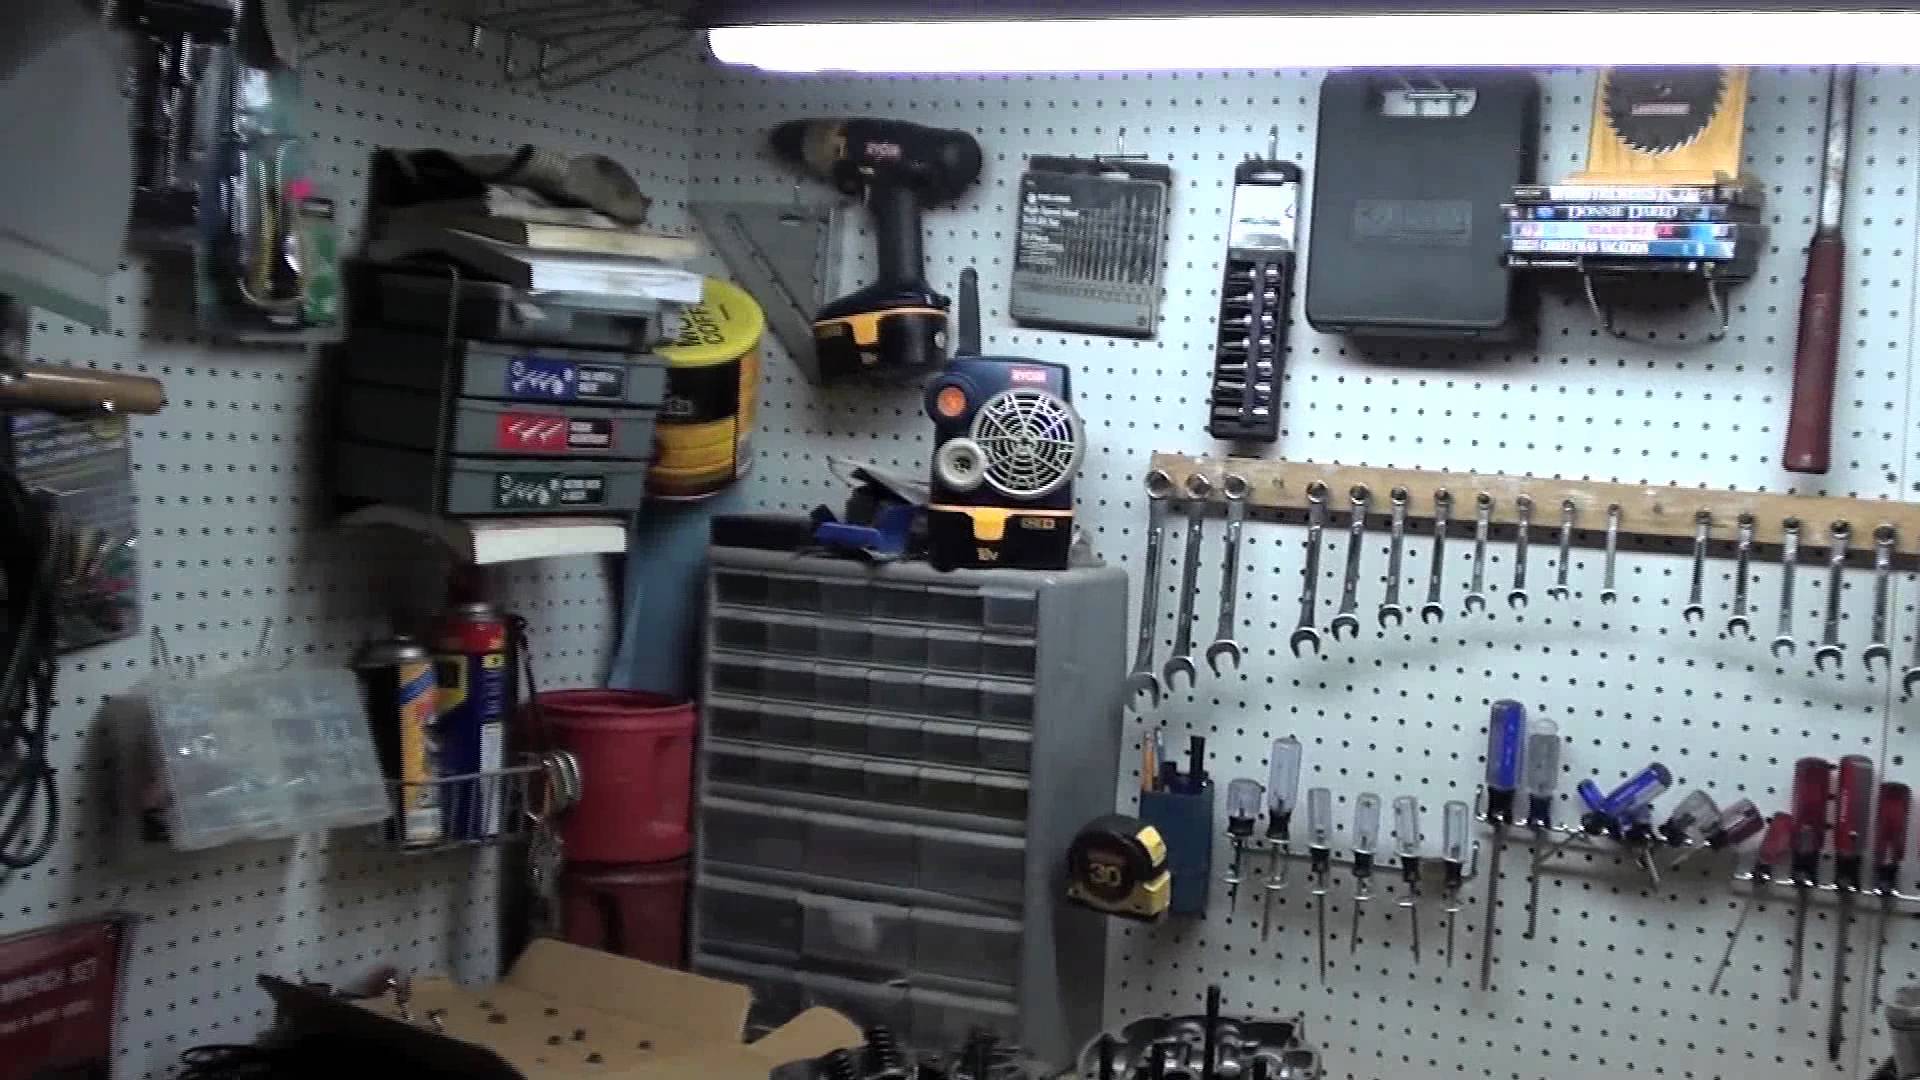 Man Cave - Shed that I built with my bare hands - YouTube